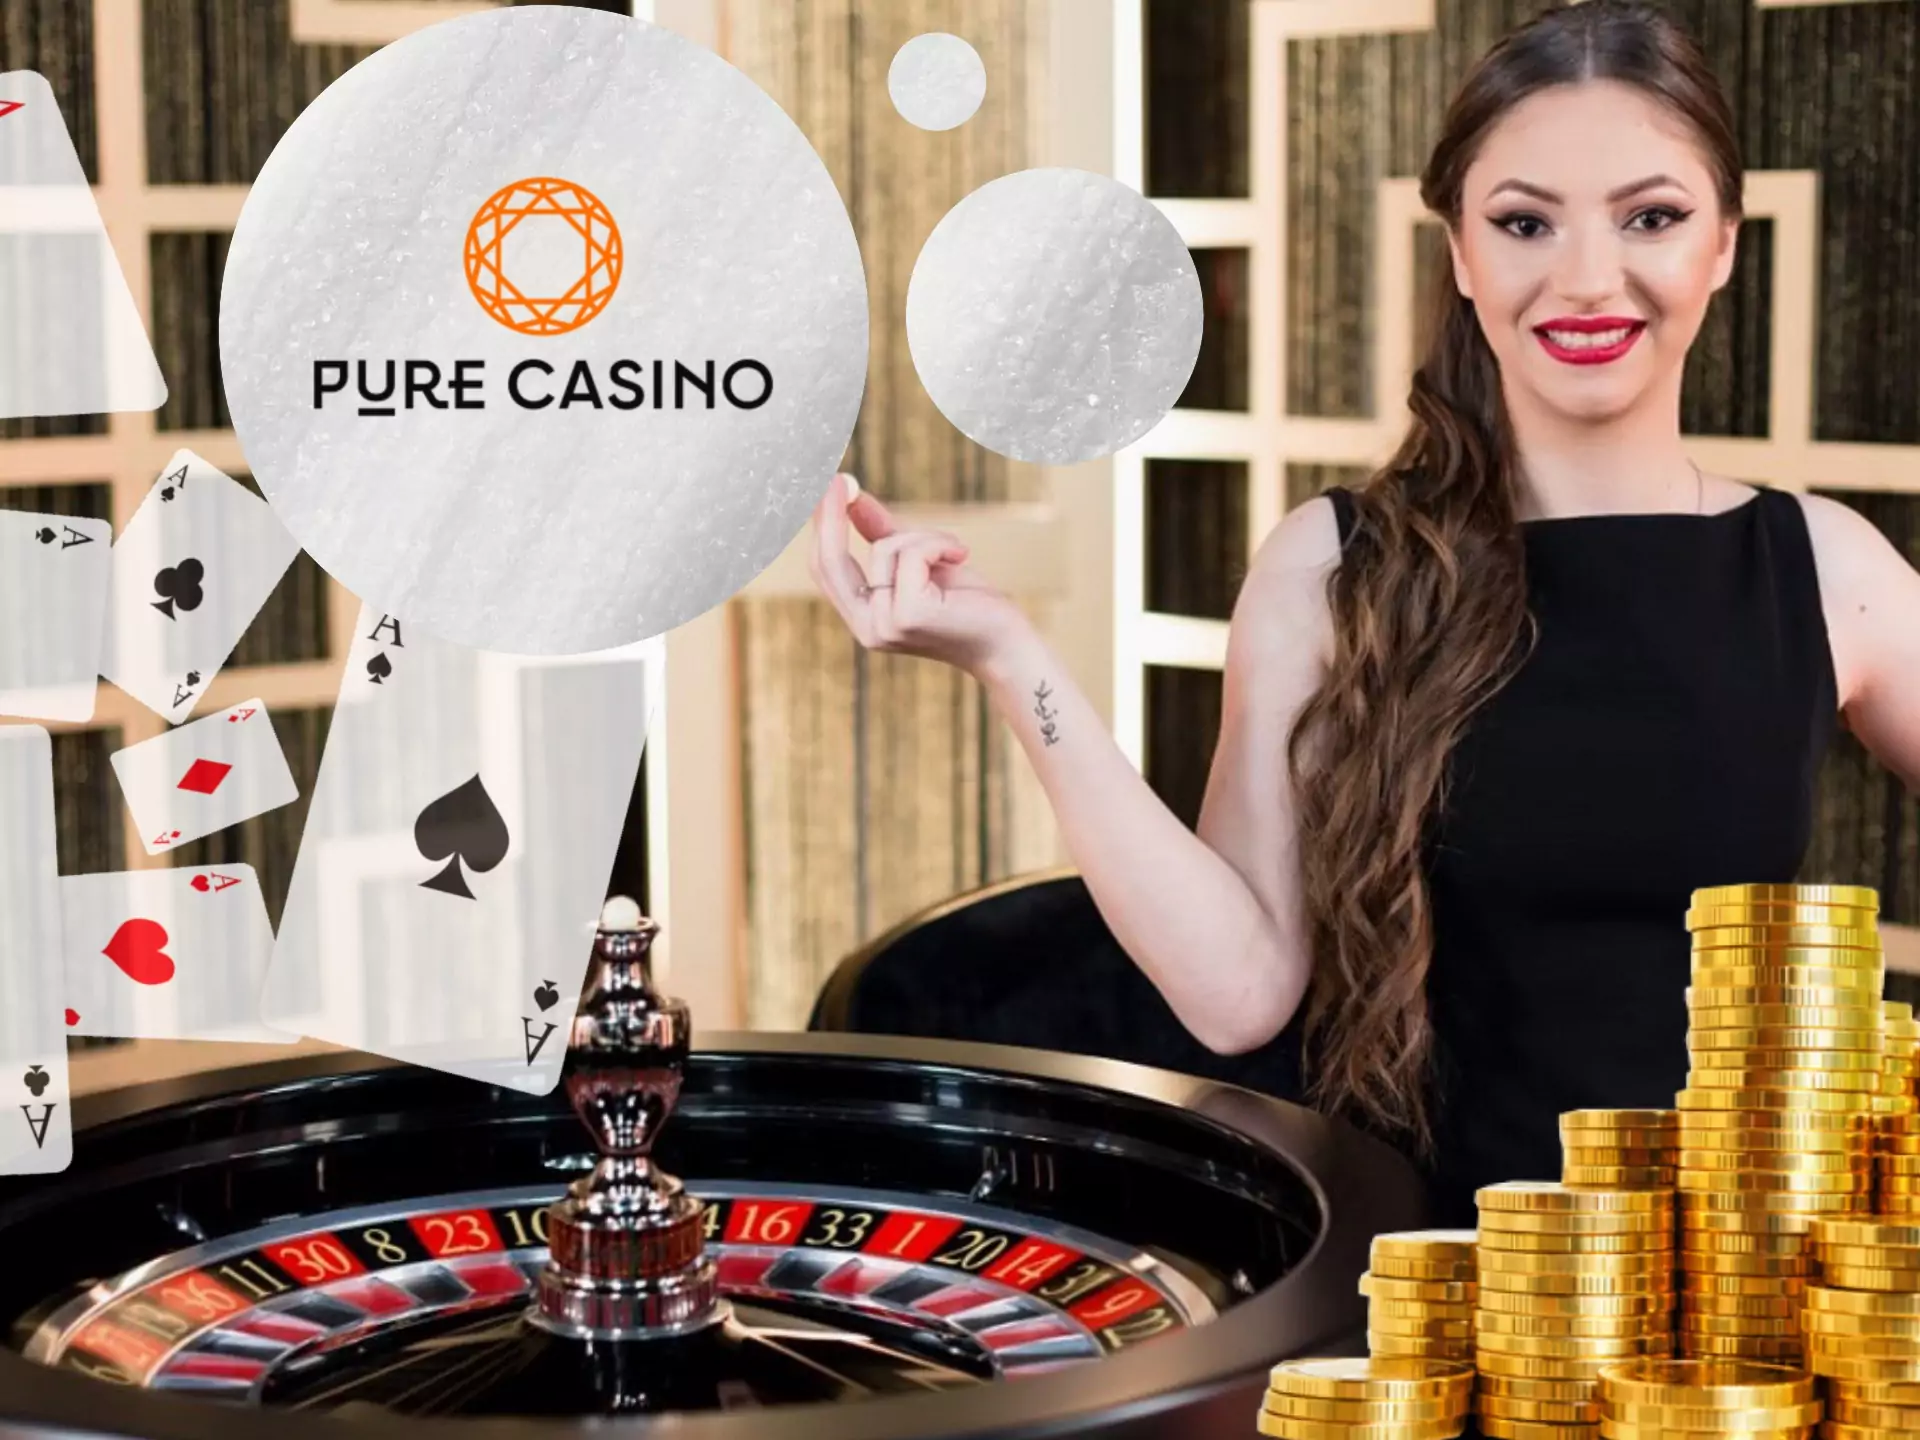 Live casino gives you an atmosphere of a real casino.